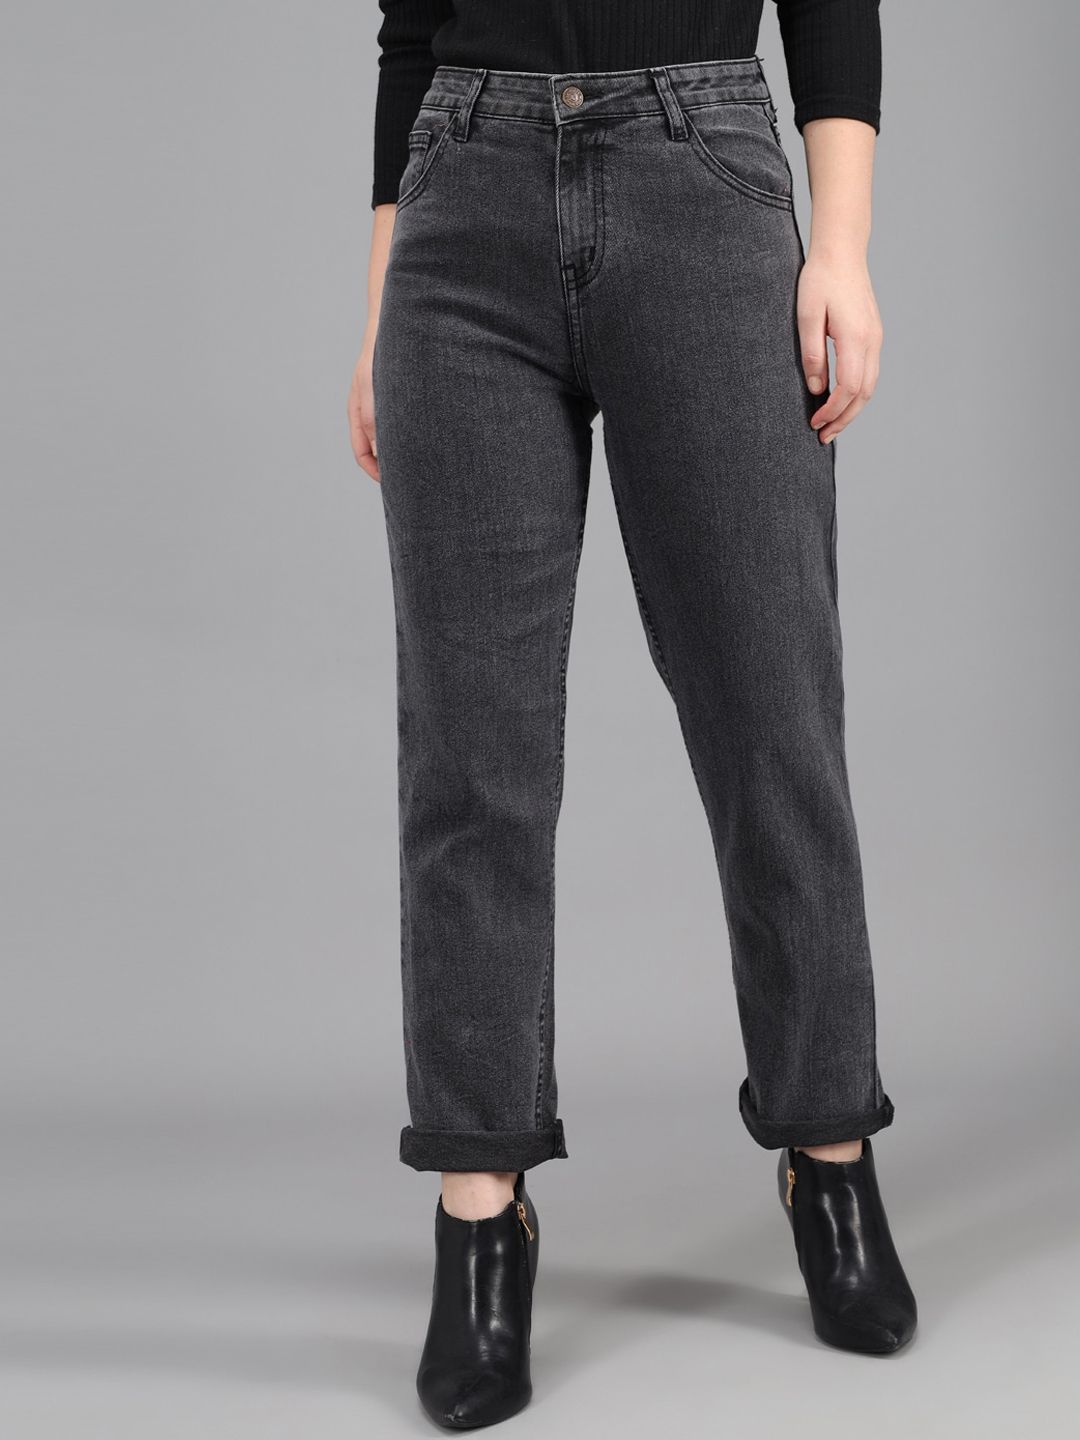 Kotty Women Charcoal Grey Slim Fit High-Rise Jeans Price in India